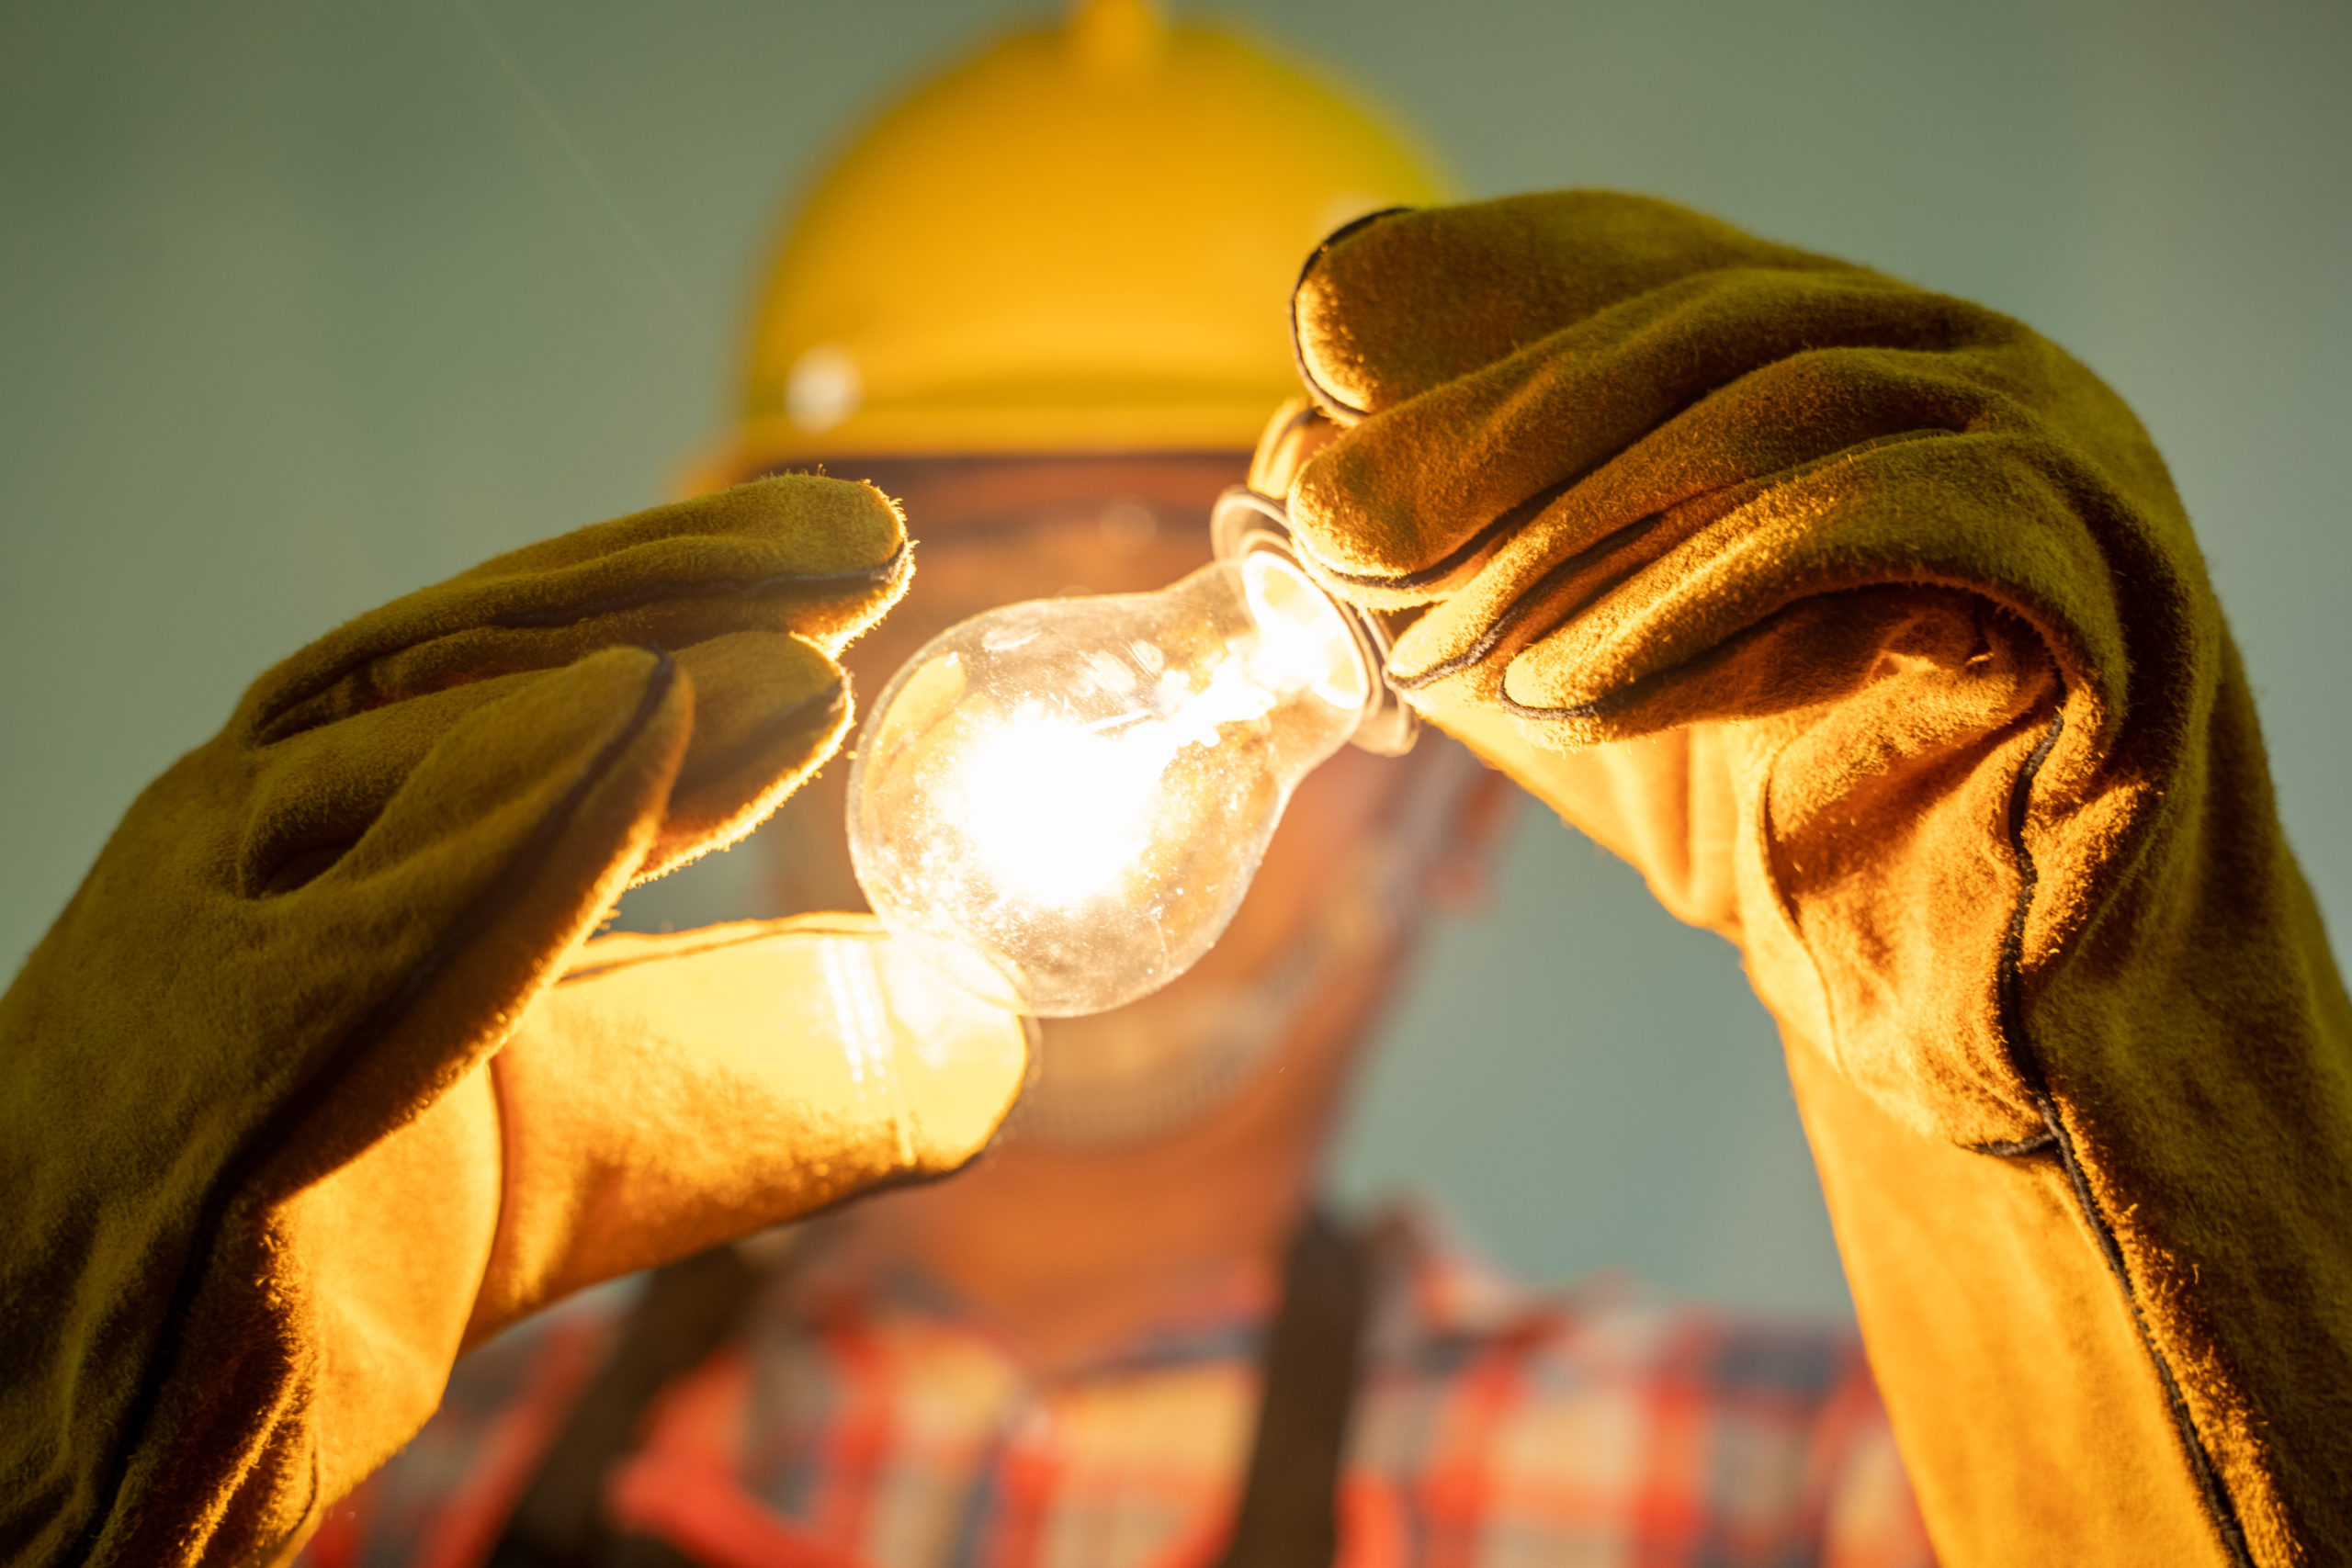 A man wearing hand gloves and a yellow hard hat, holding a light bulb that is switched on